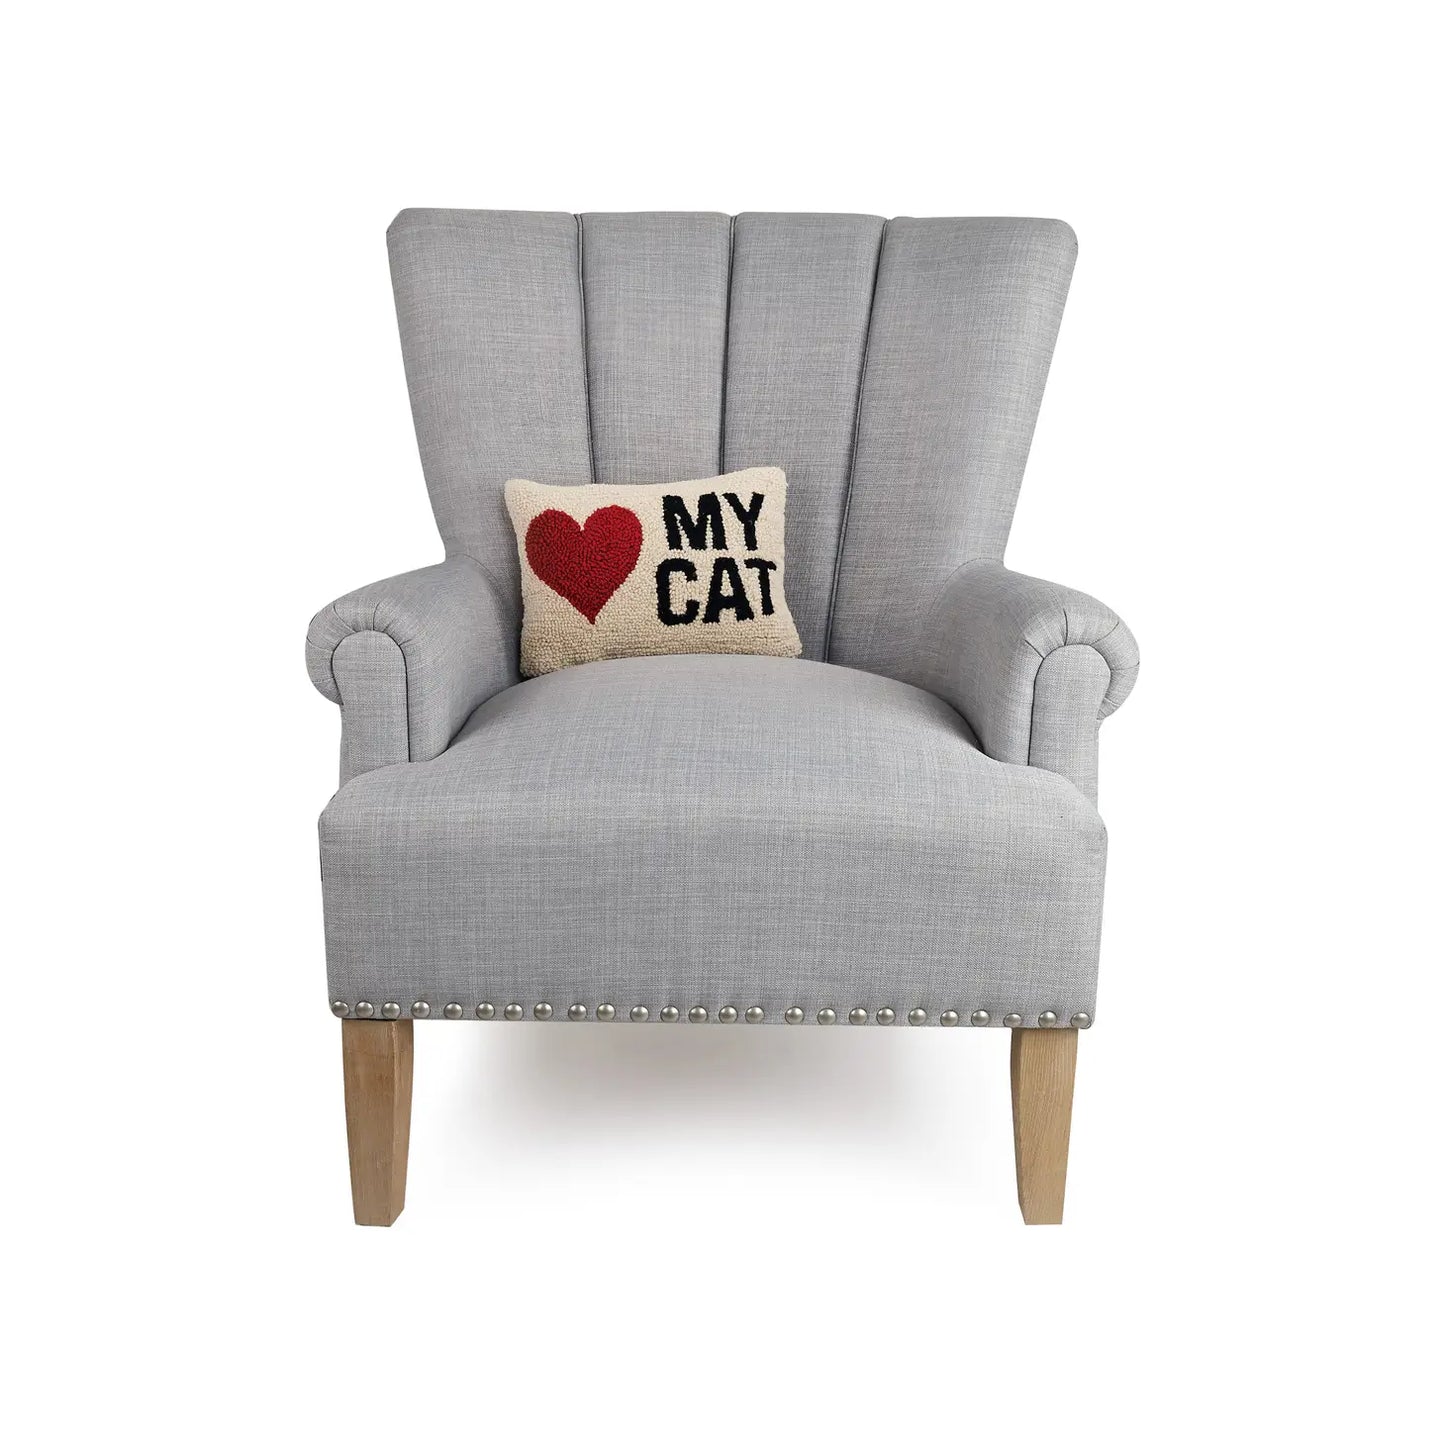 Love My Cat Small Cushion APRIL PRE ORDER